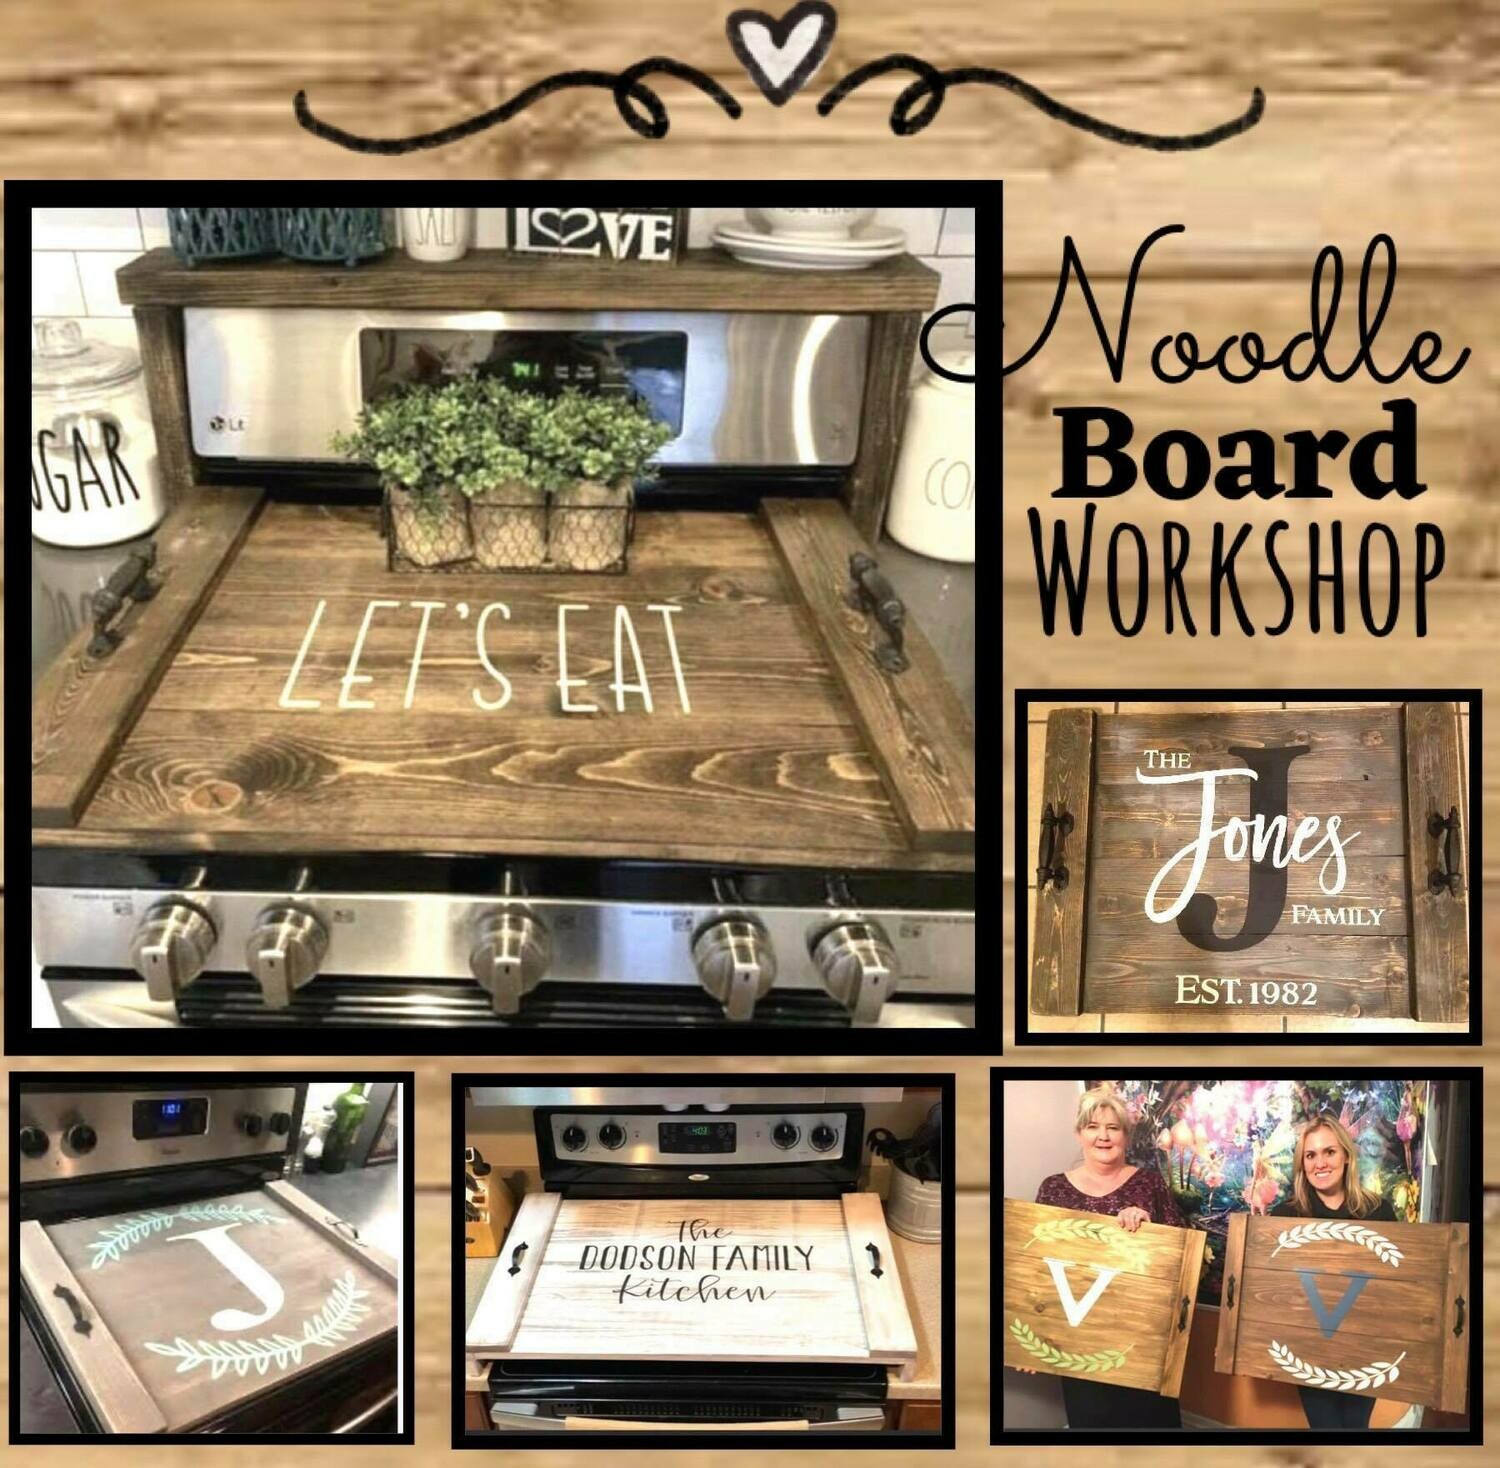 Noodle Board Stovetop cover